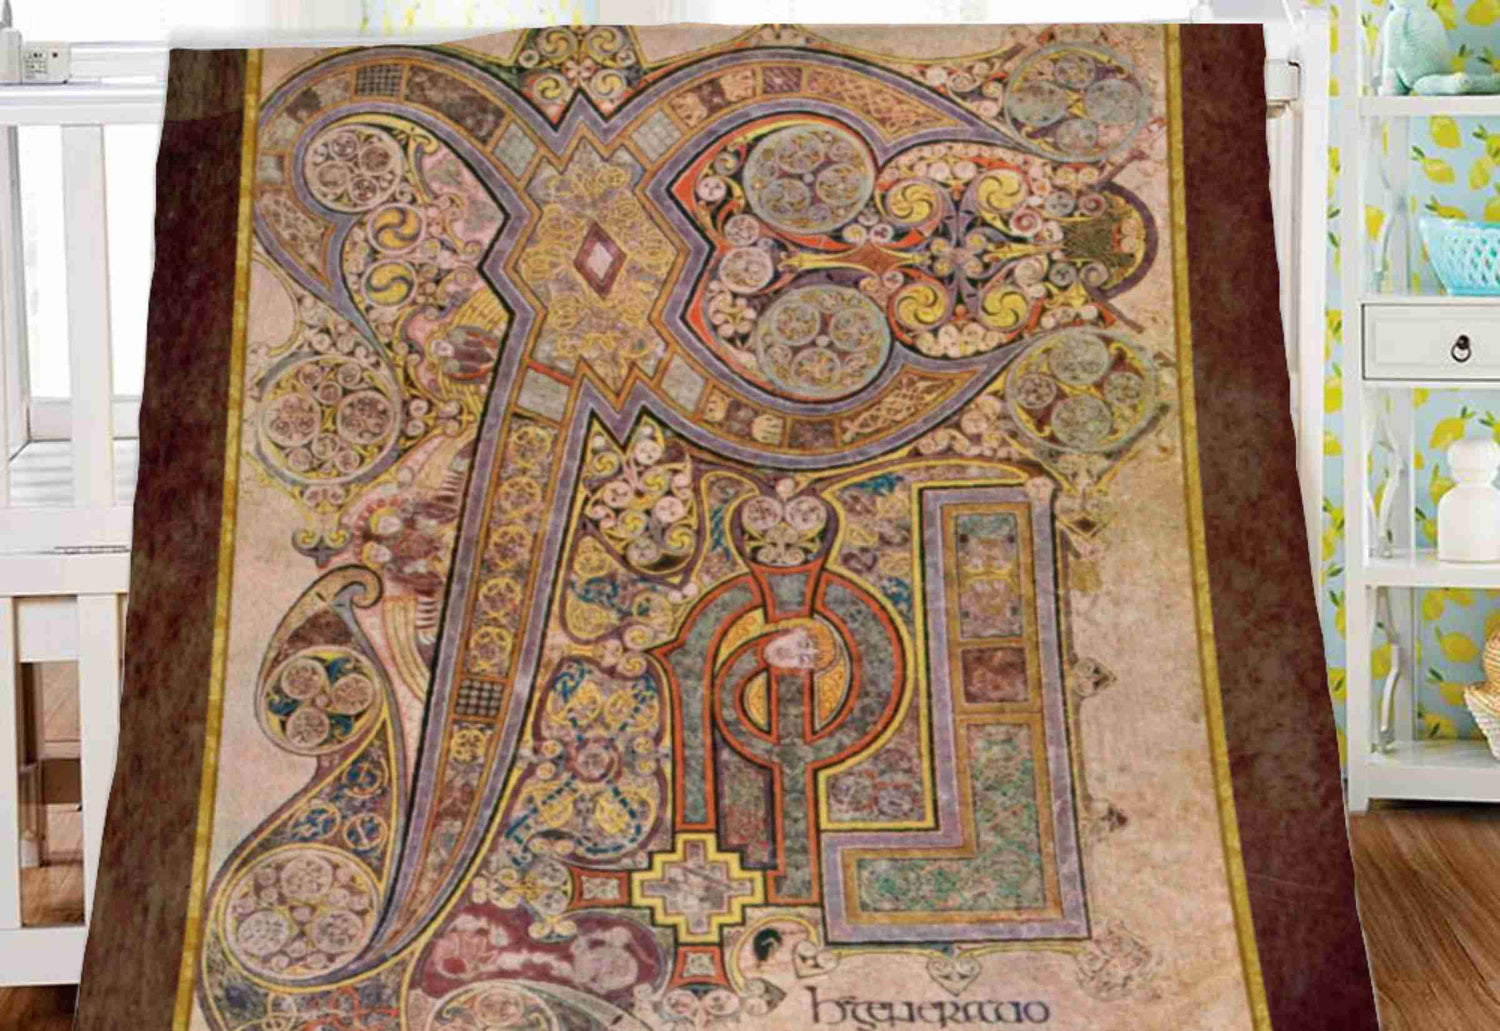 The Book of Kells Collection